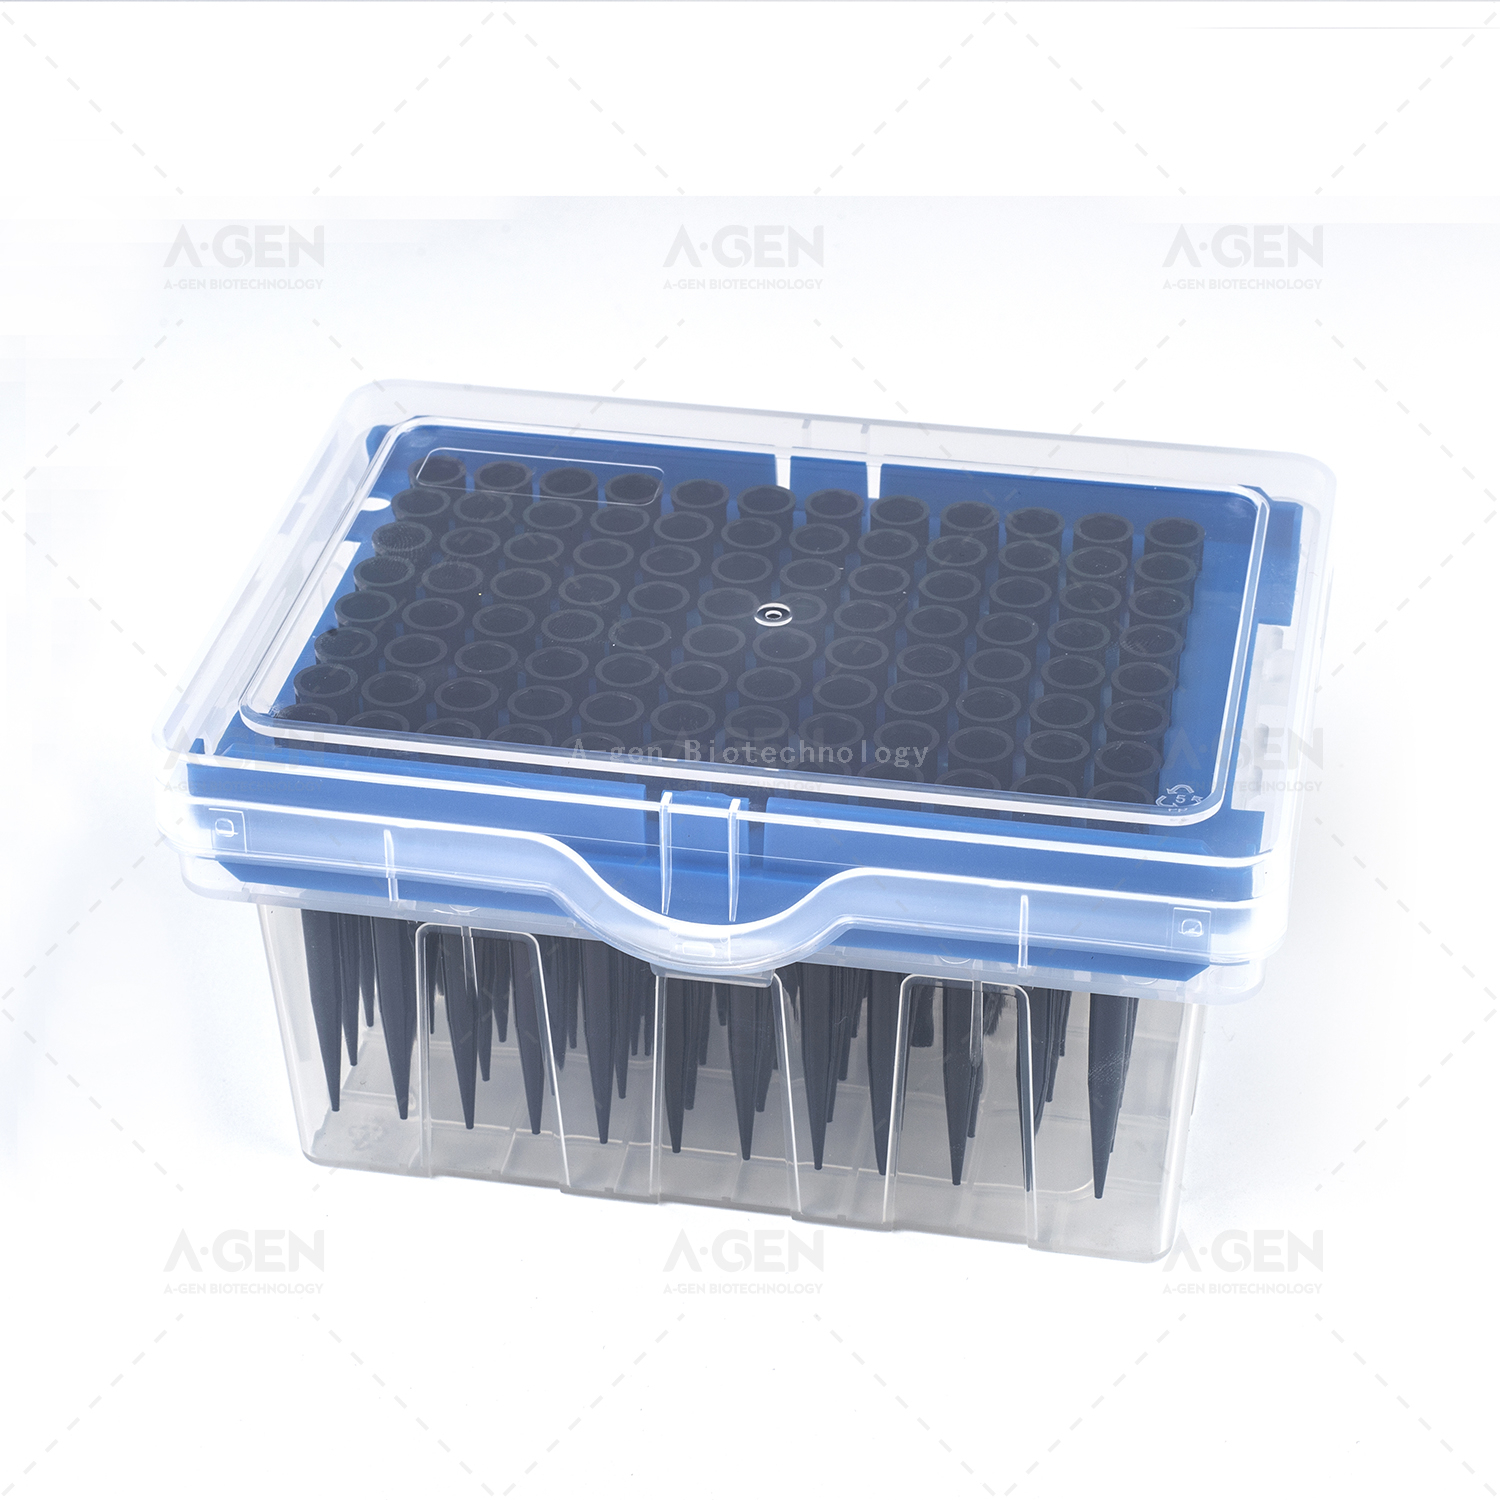 Tecan LiHa Conductive 200μL PP Pipette Tip (Racked,sterilized) for Liquid Transfer With Filter TTF-200C-RS DNAse/RNAse Free 